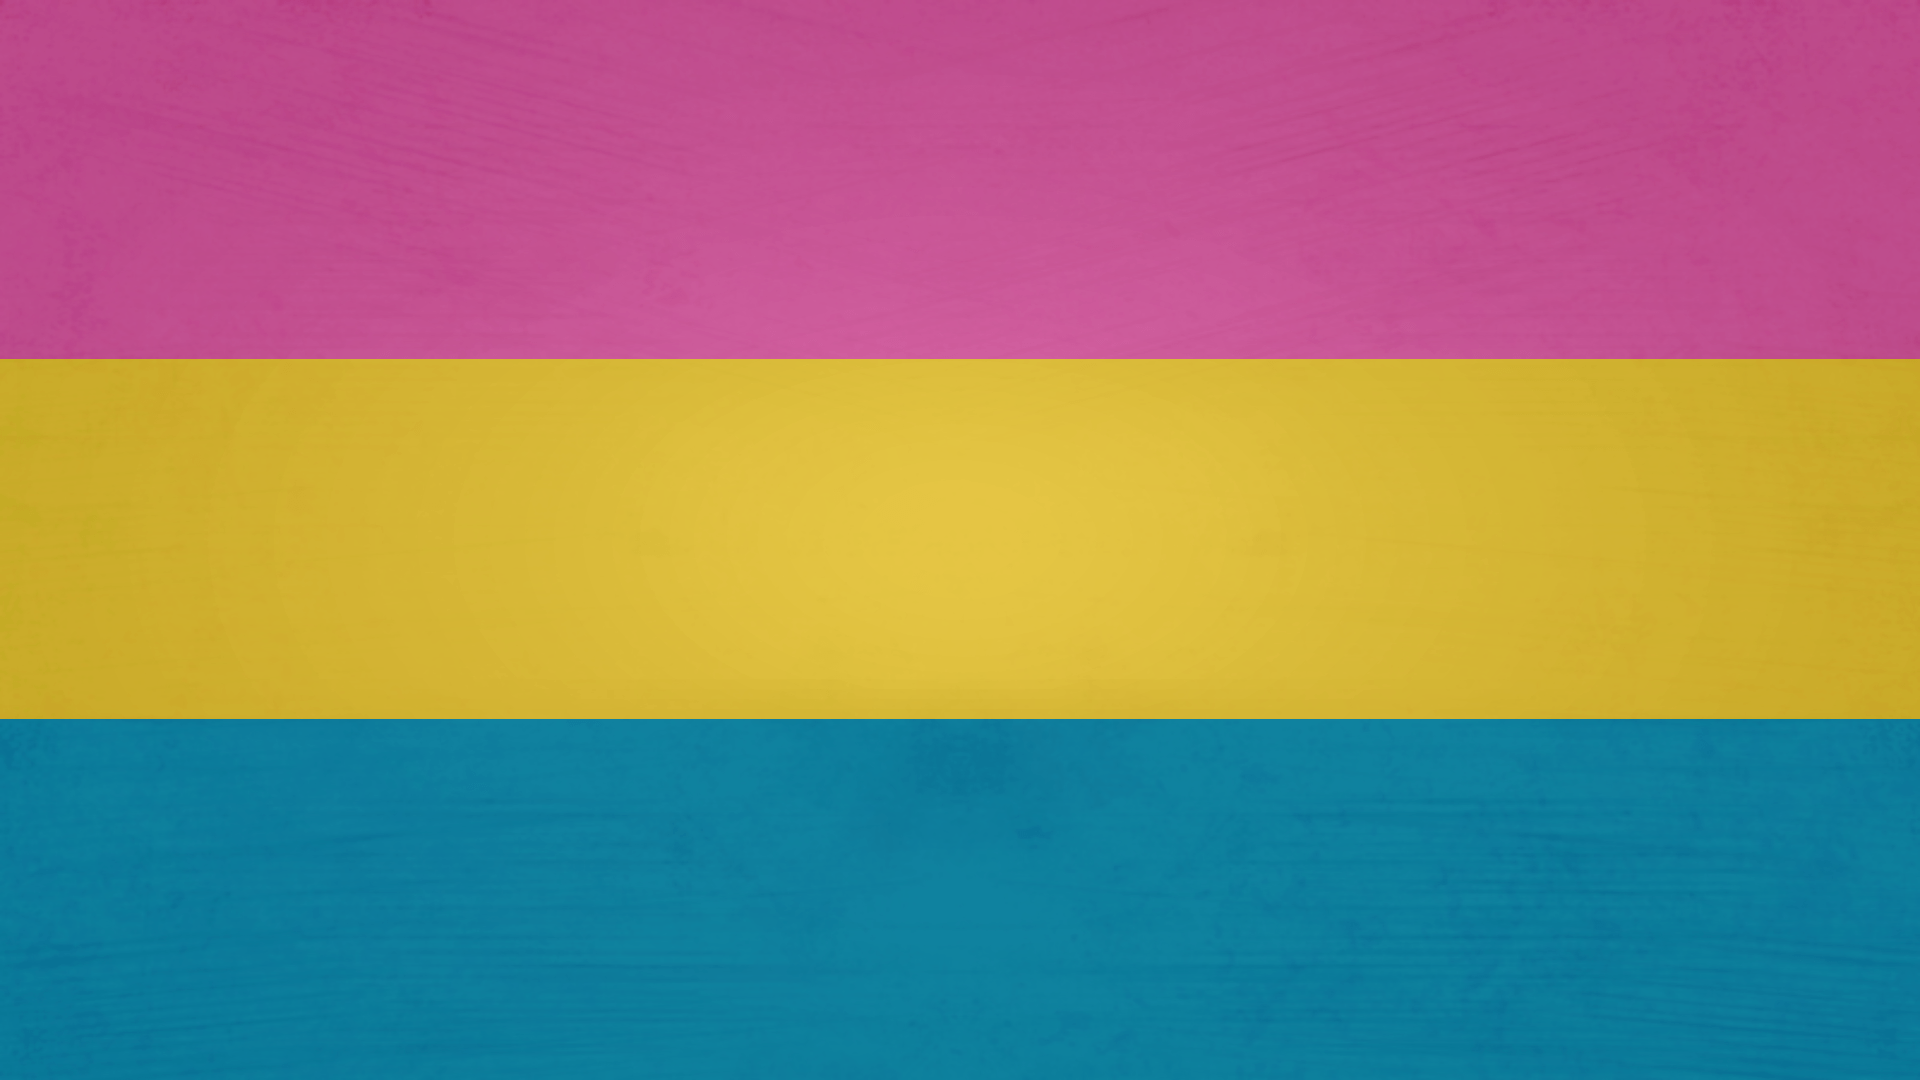 Made a pansexual flag desktop background! : pansexual